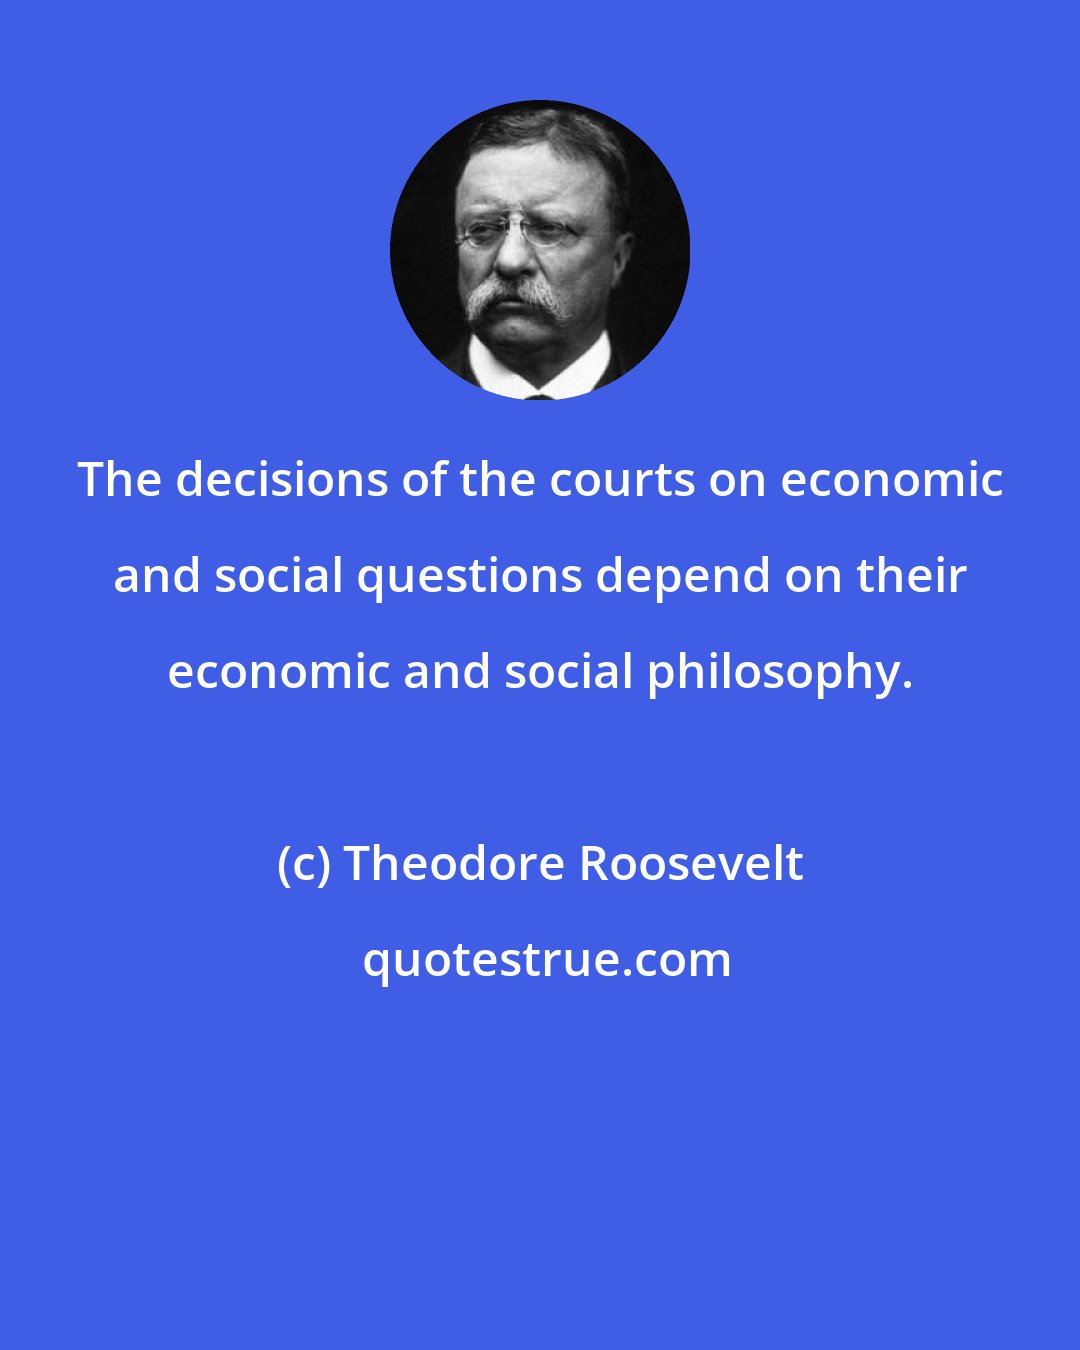 Theodore Roosevelt: The decisions of the courts on economic and social questions depend on their economic and social philosophy.